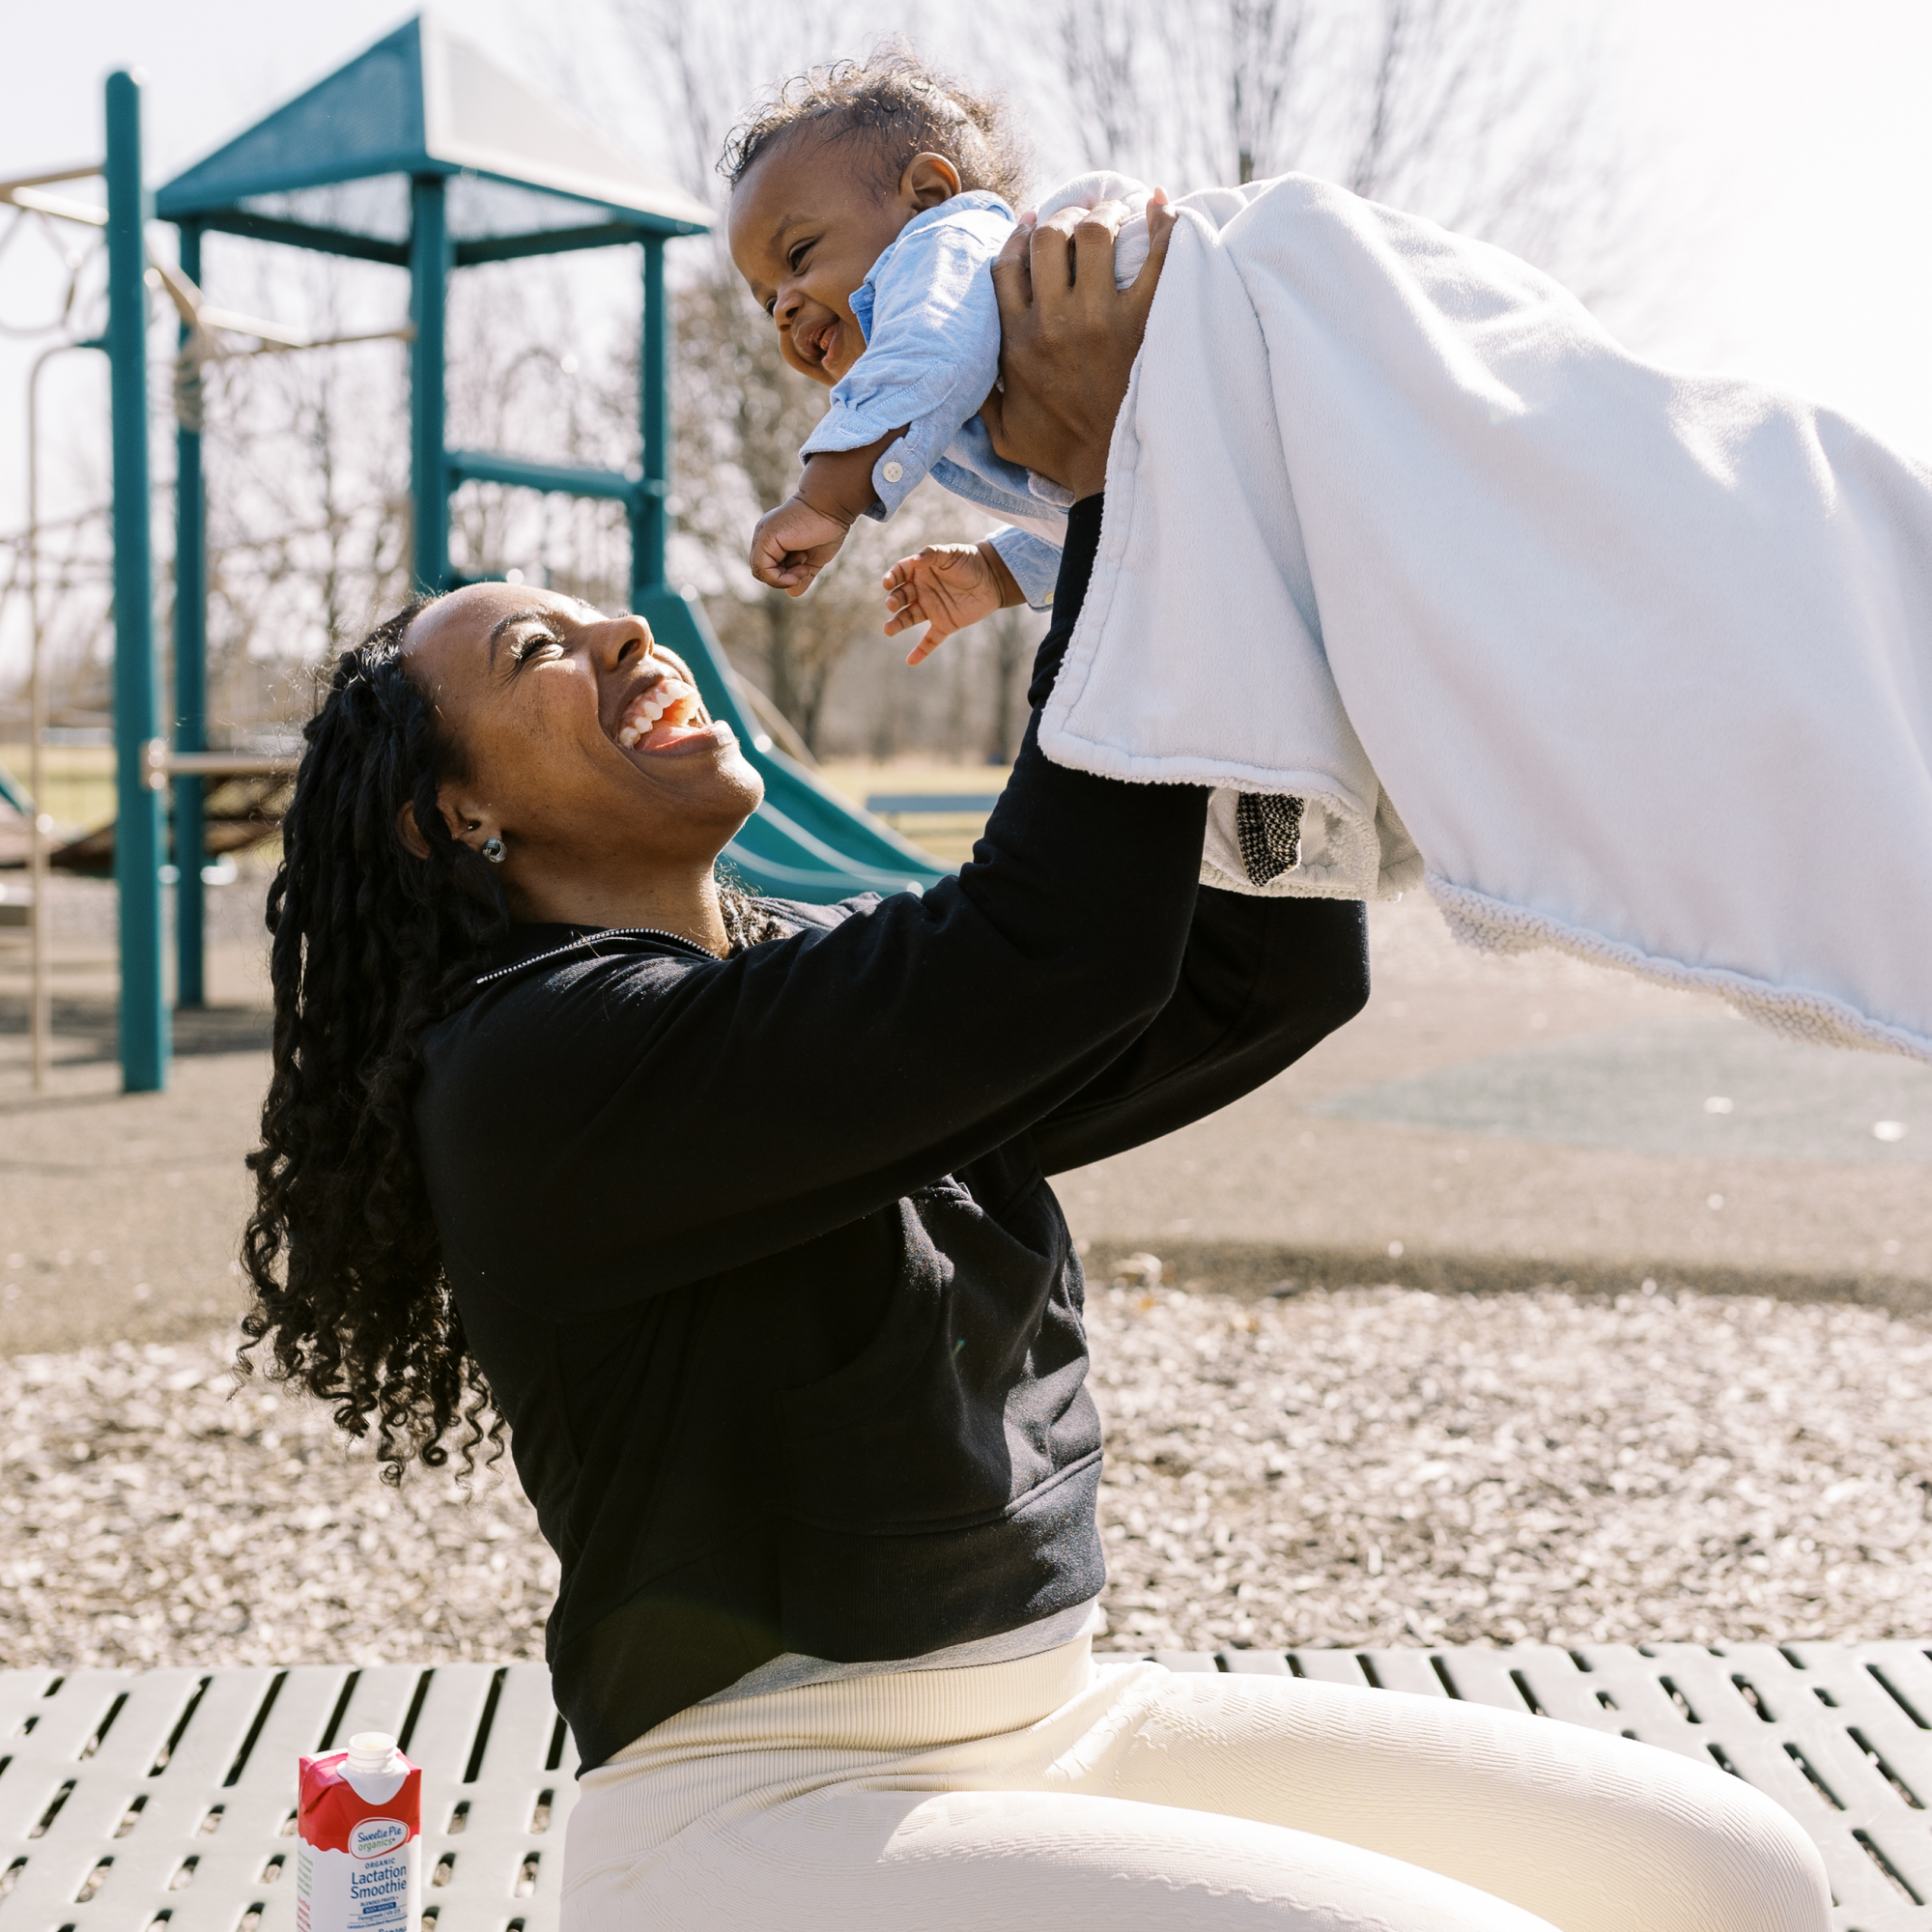 Lifestyle image of mom at the park lifting her young baby up